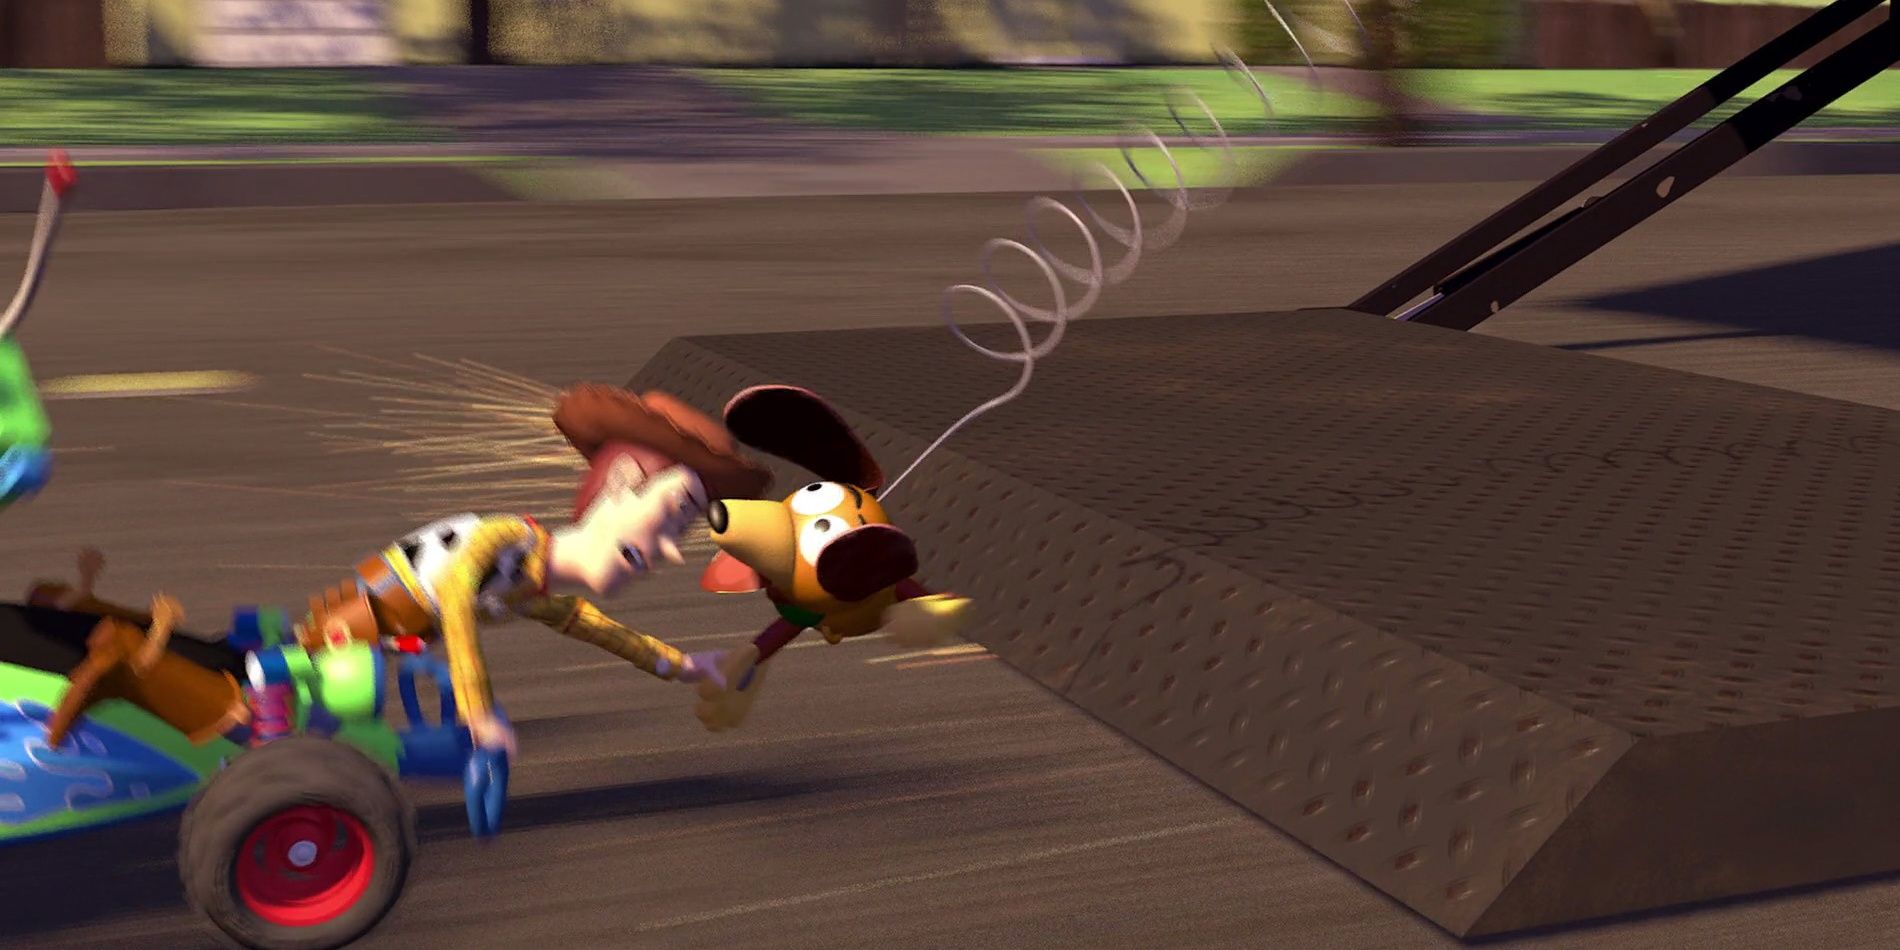 Slinky hangs on to Woody in Toy Story